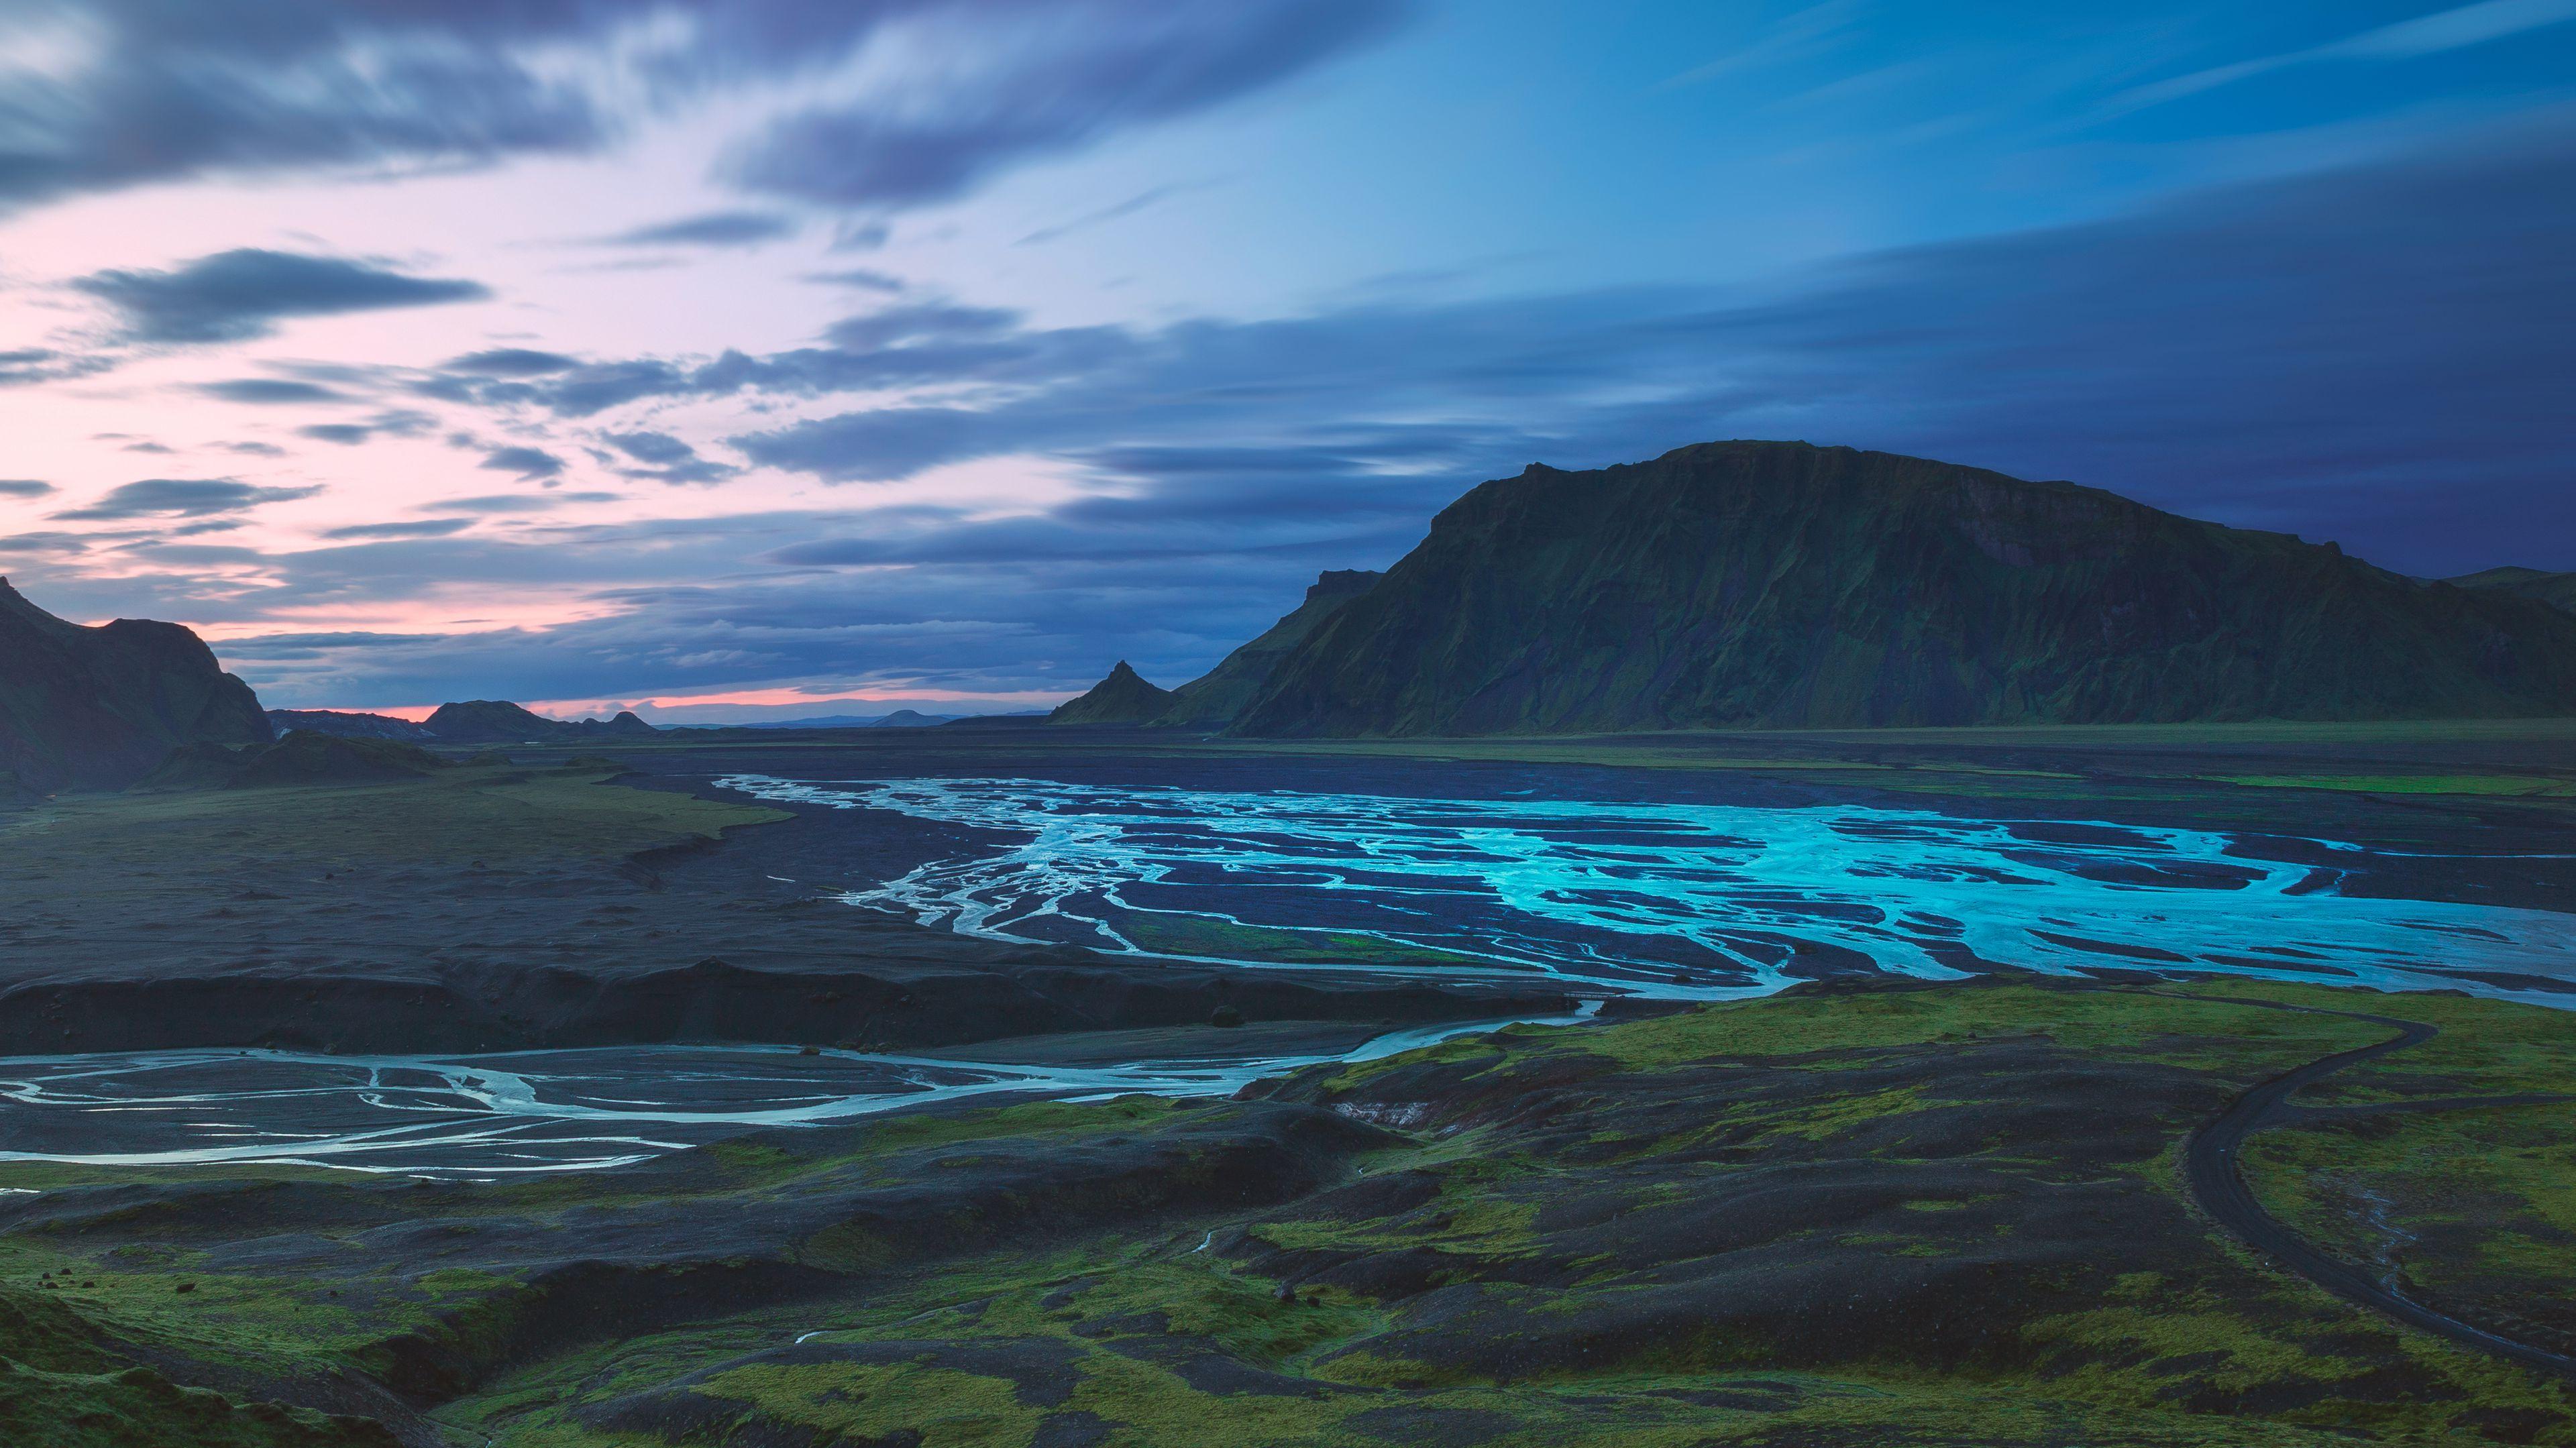 Wallpaper ID 9997 mountains river valley landscape iceland